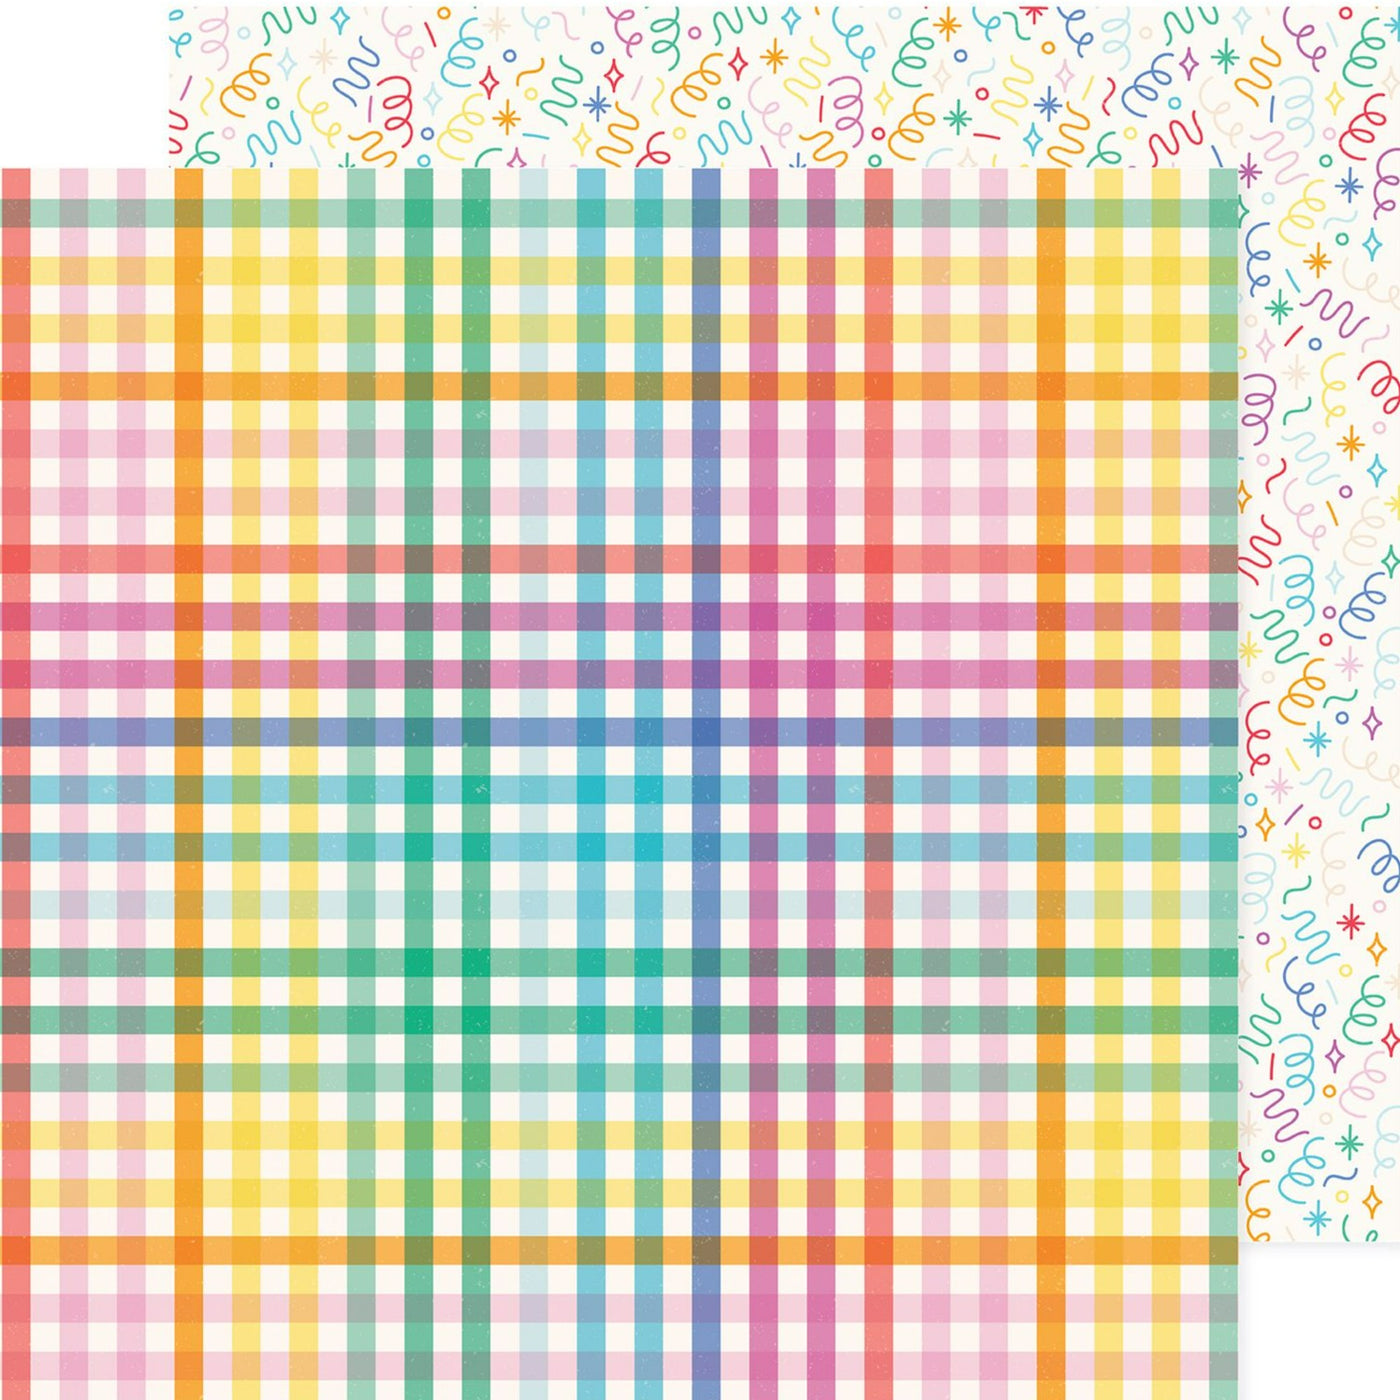 12x12 double-sided patterned cardstock - (Side A - plaid in a rainbow of colors on a white background, Side B - confetti in a rainbow of colors on a white background) - Pebbles